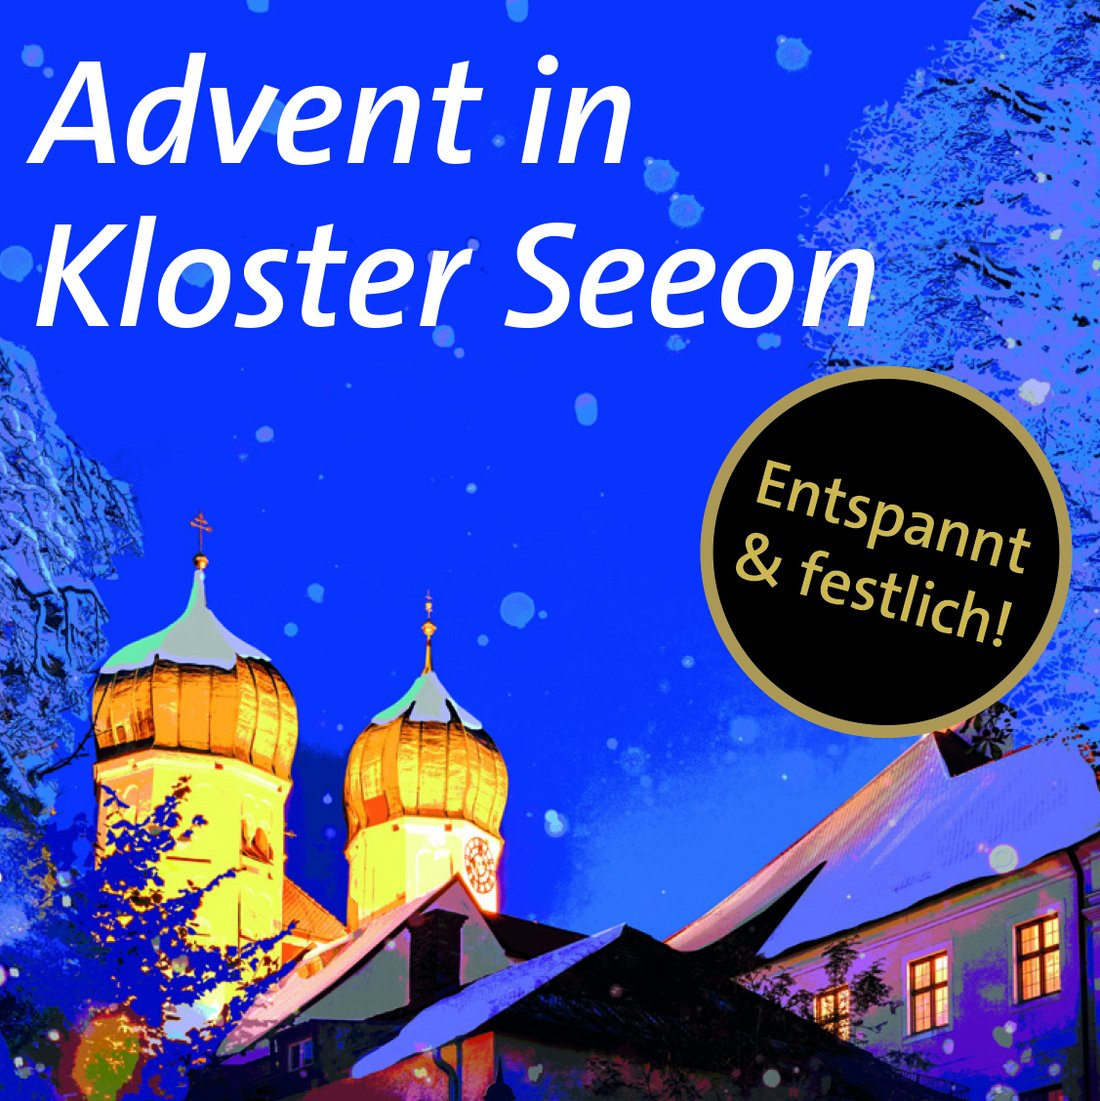 seeon_advent_dinlang_221111_1500-003-1-002_1